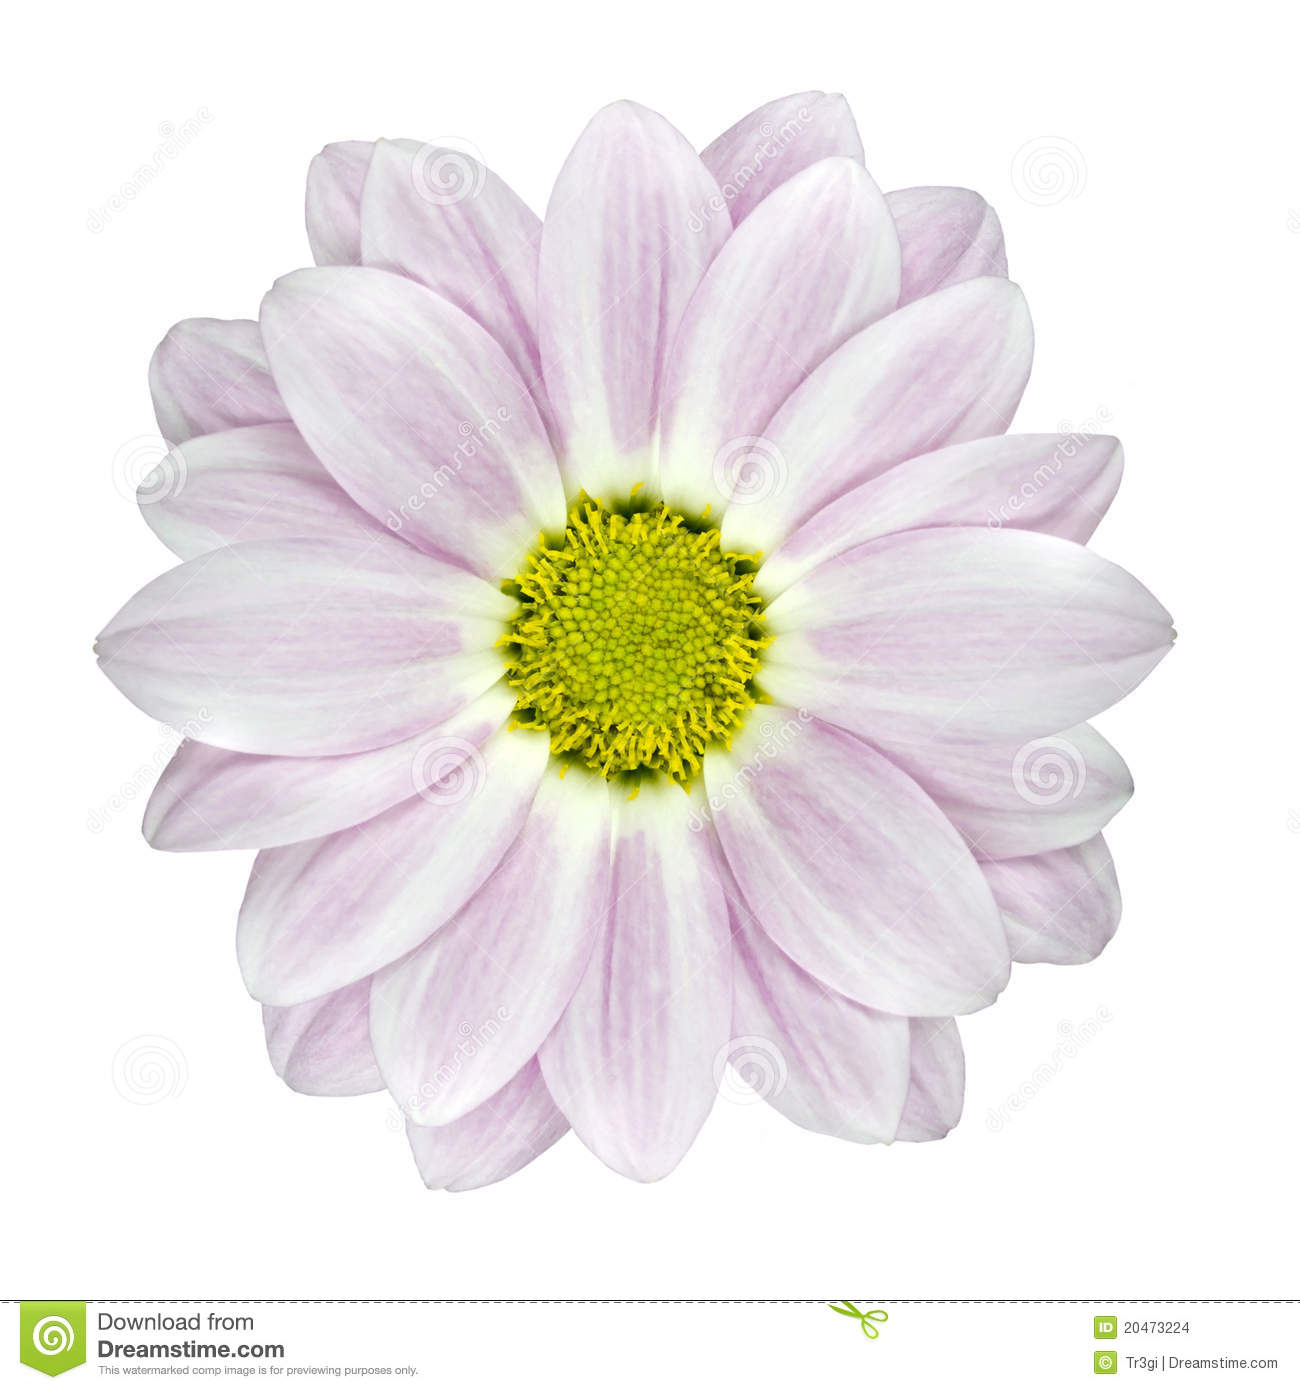 Single Pink And White Dahlia Flower With Yellow Center Isolated On